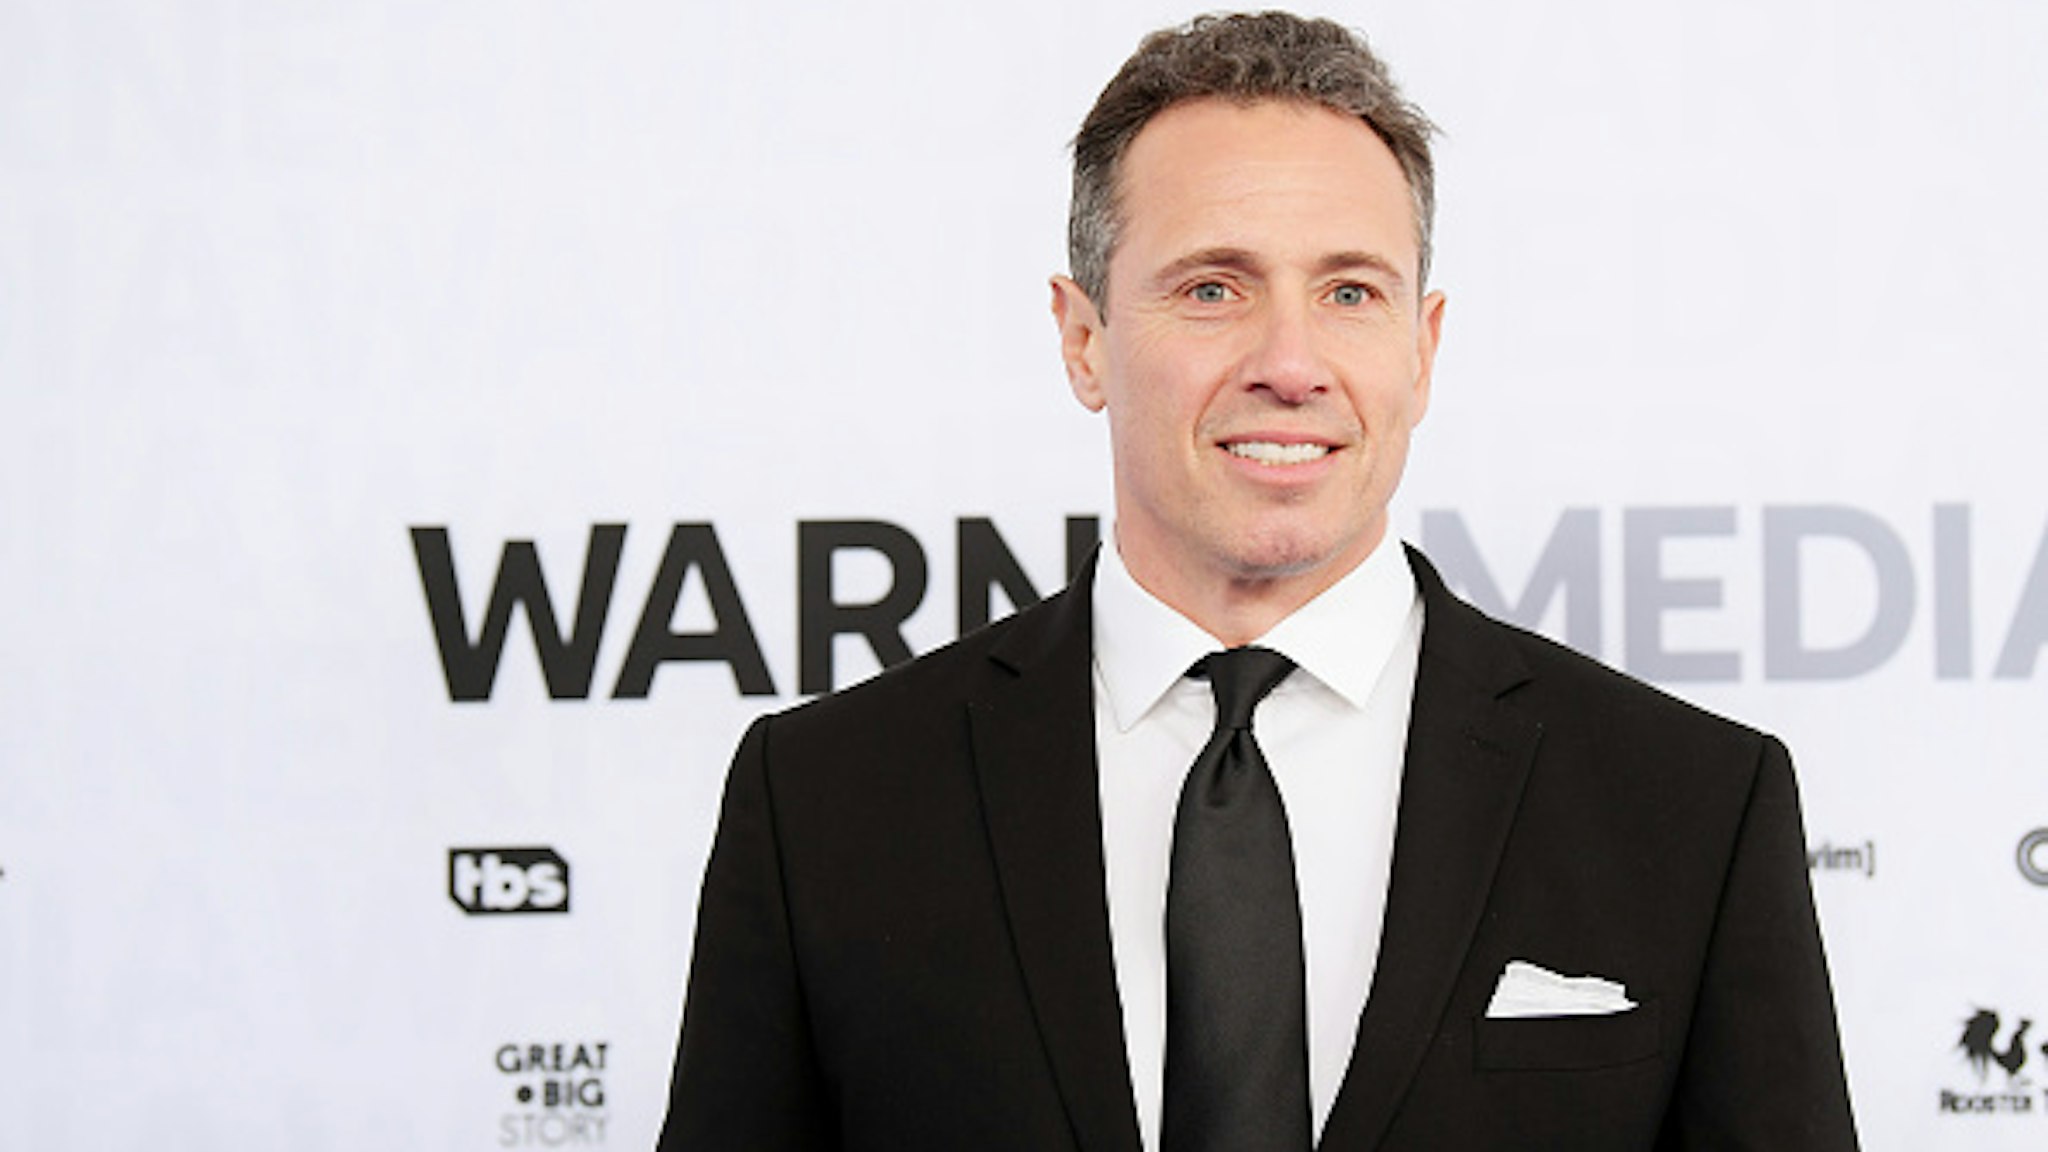 Chris Cuomo of CNN’s Cuomo Prime Time attends the WarnerMedia Upfront 2019 arrivals on the red carpet at The Theater at Madison Square Garden on May 15, 2019 in New York City. 602140